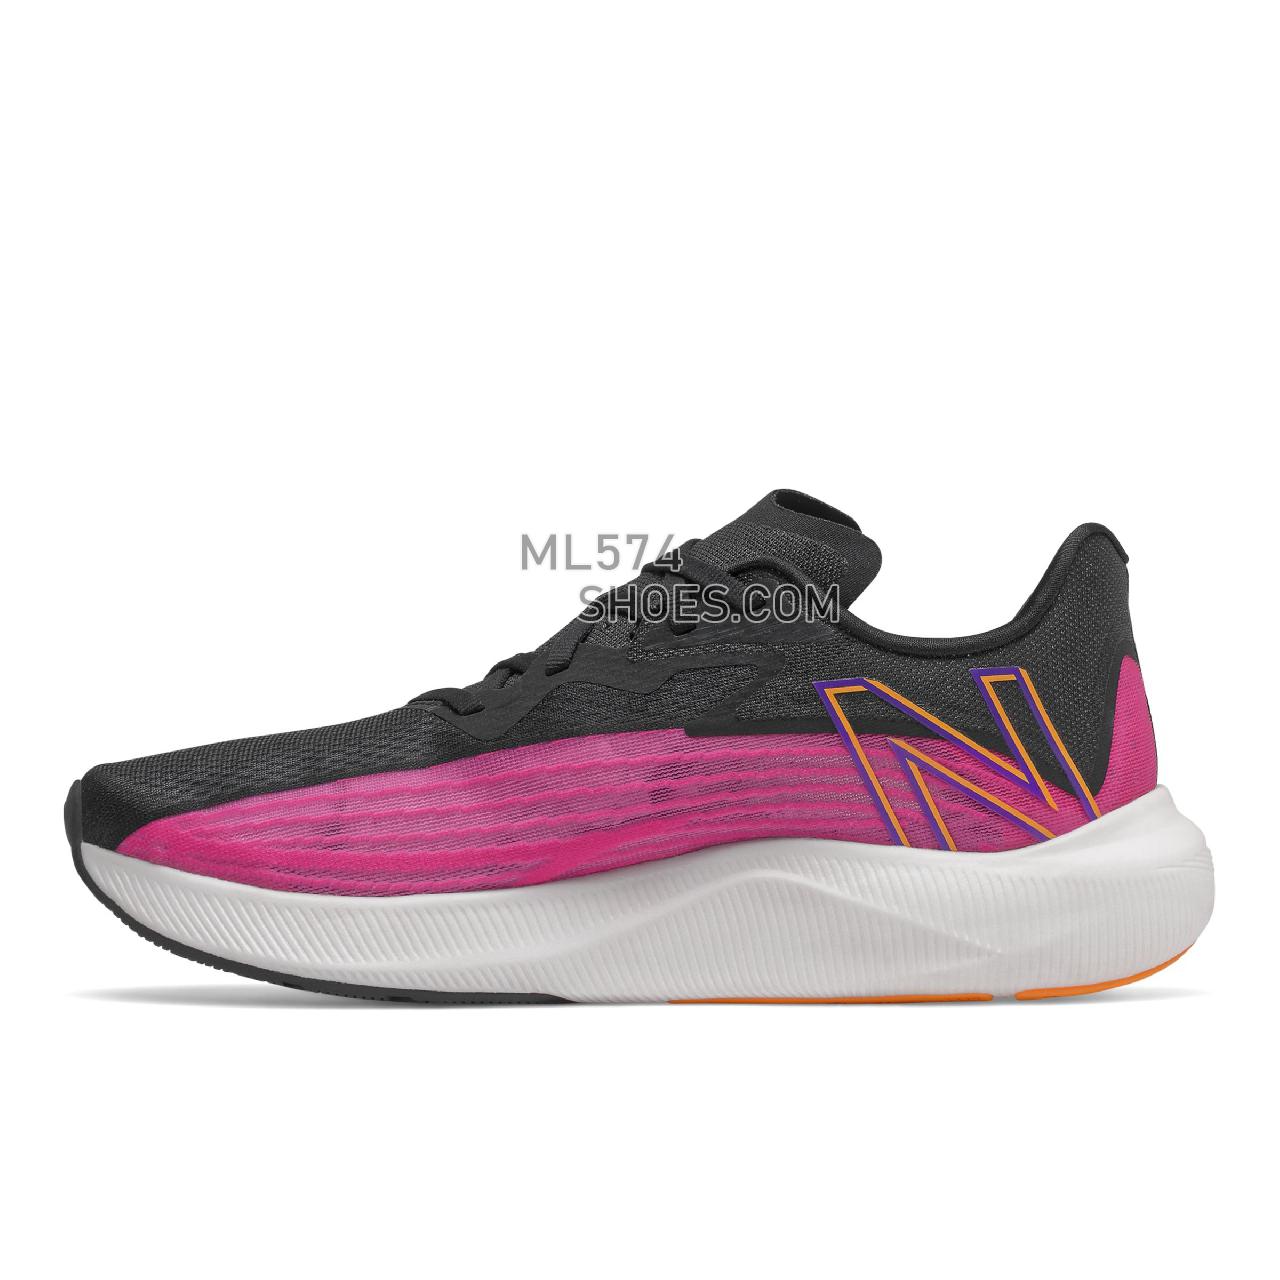 New Balance FuelCell Rebel v2 - Men's Neutral Running - Pink Glo with Black - MFCXCP2